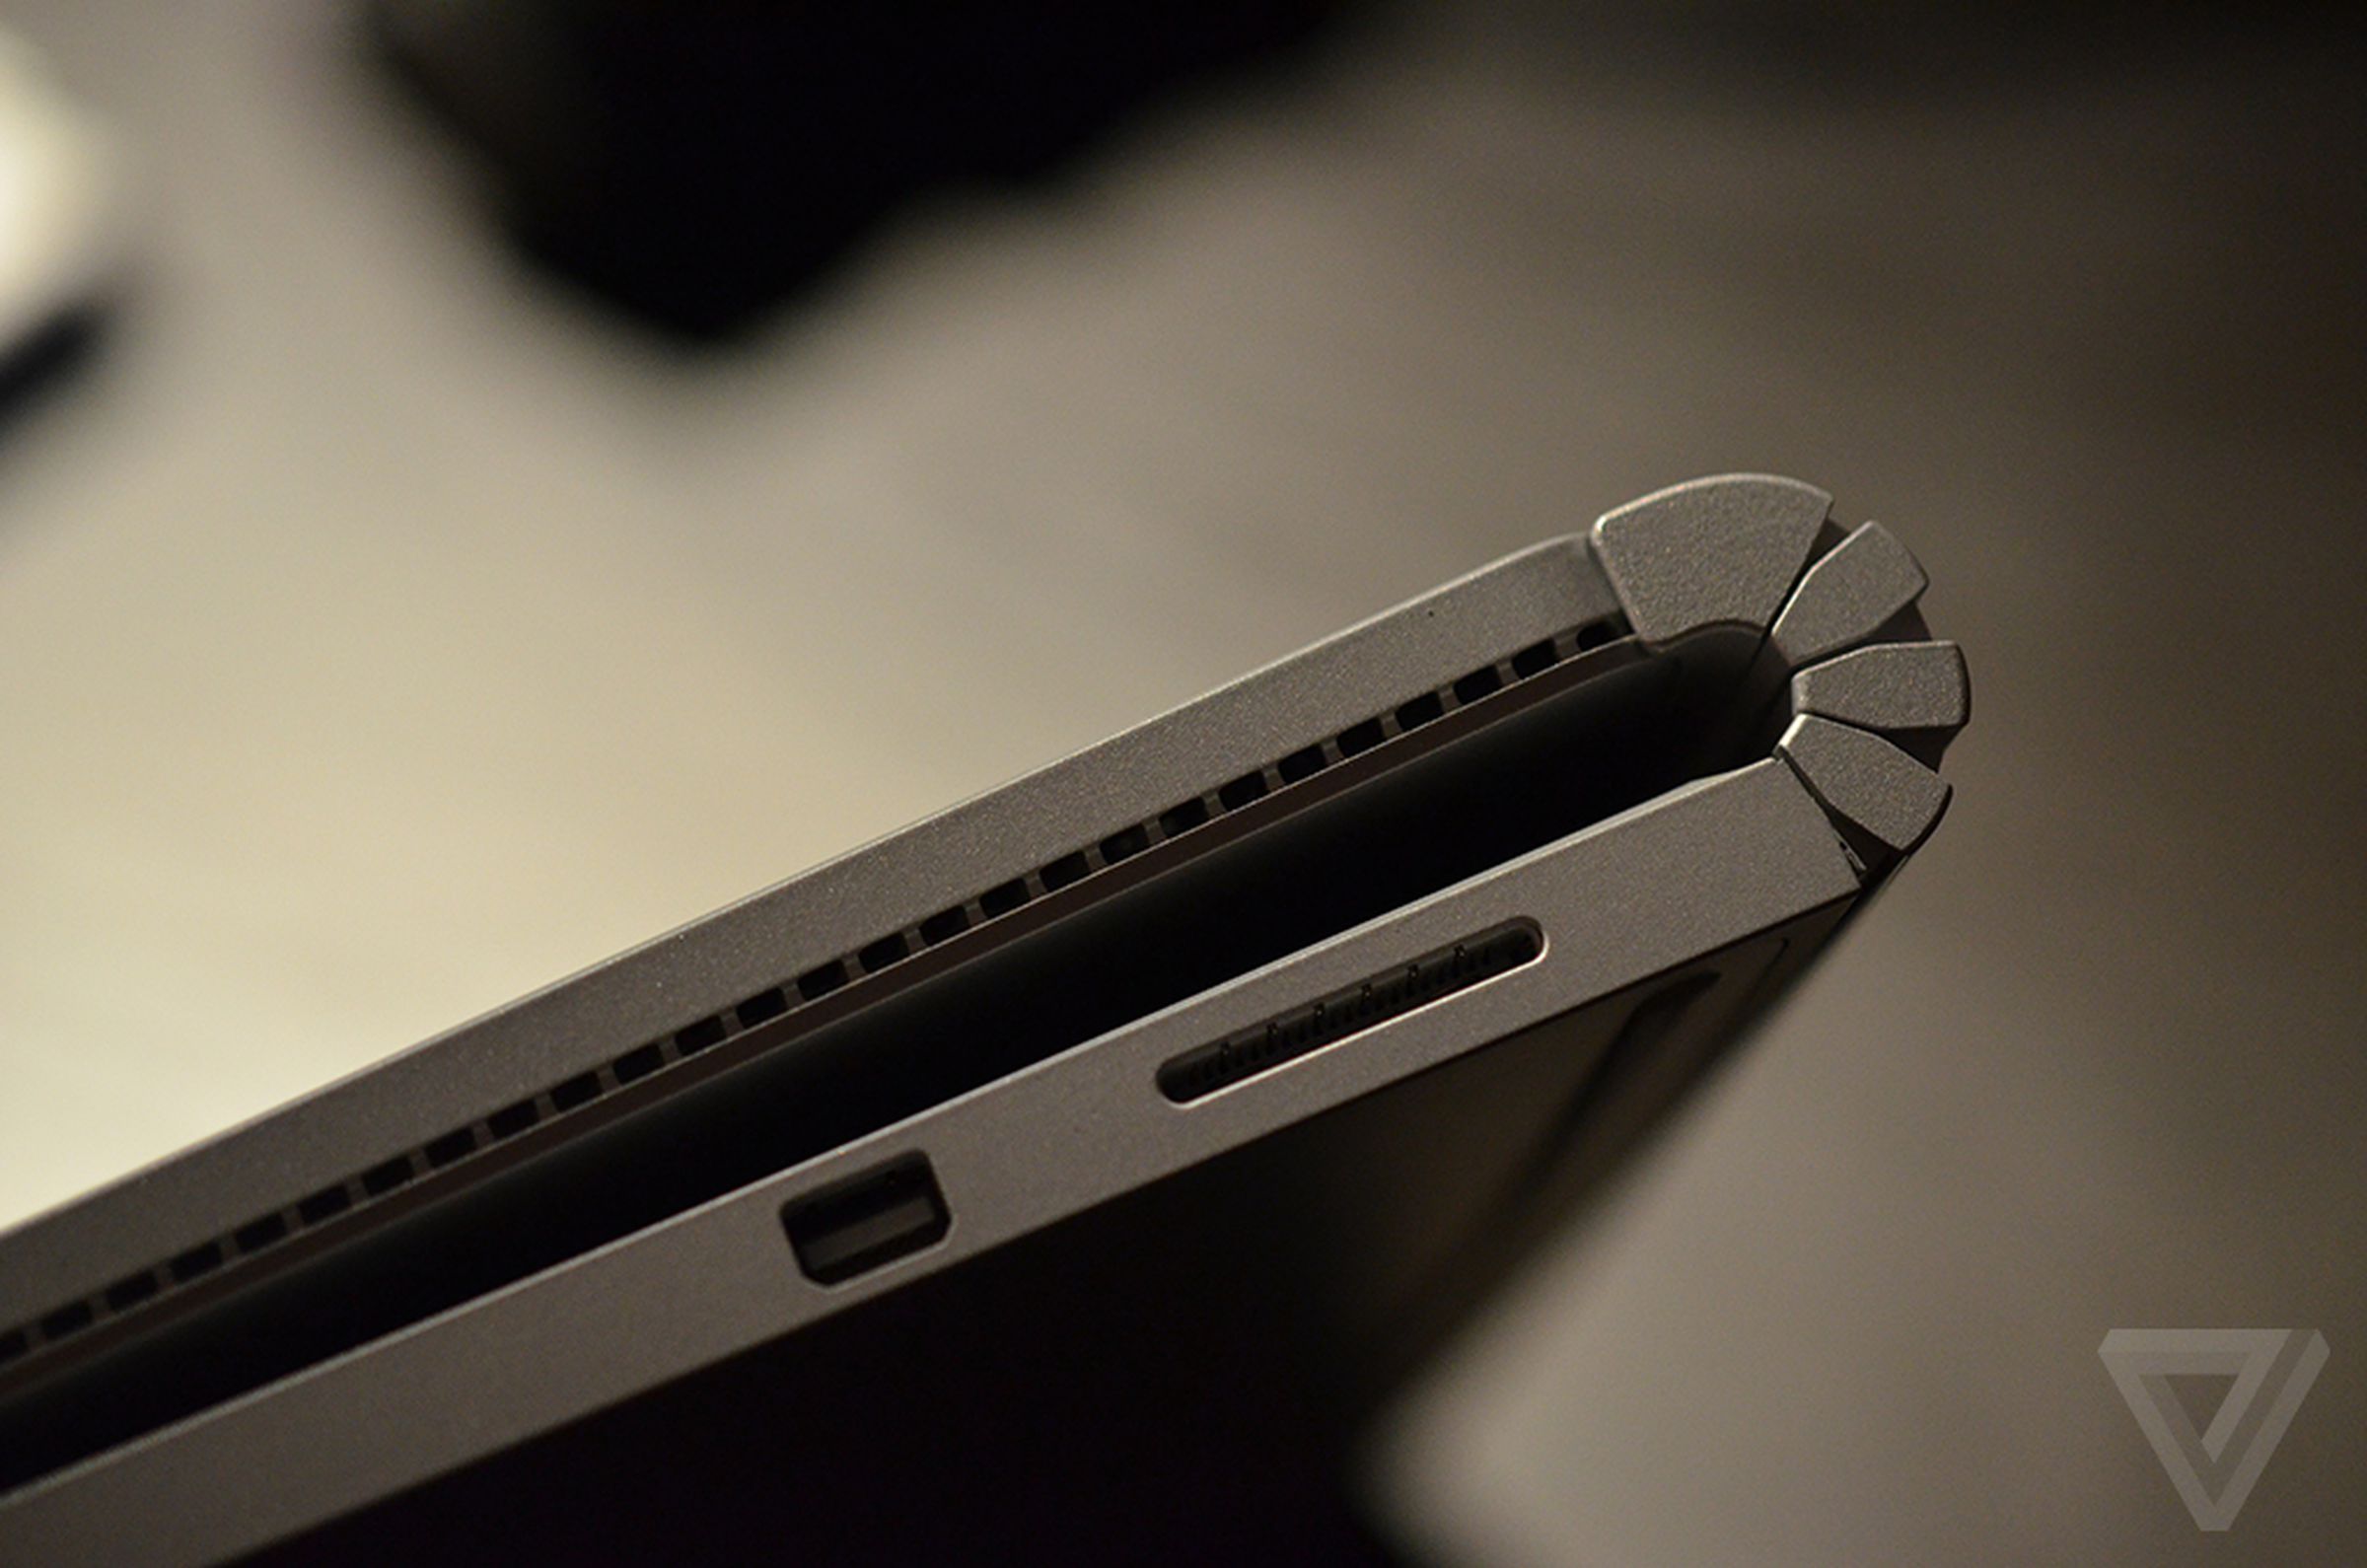 Microsoft Surface Book laptop hands-on photos